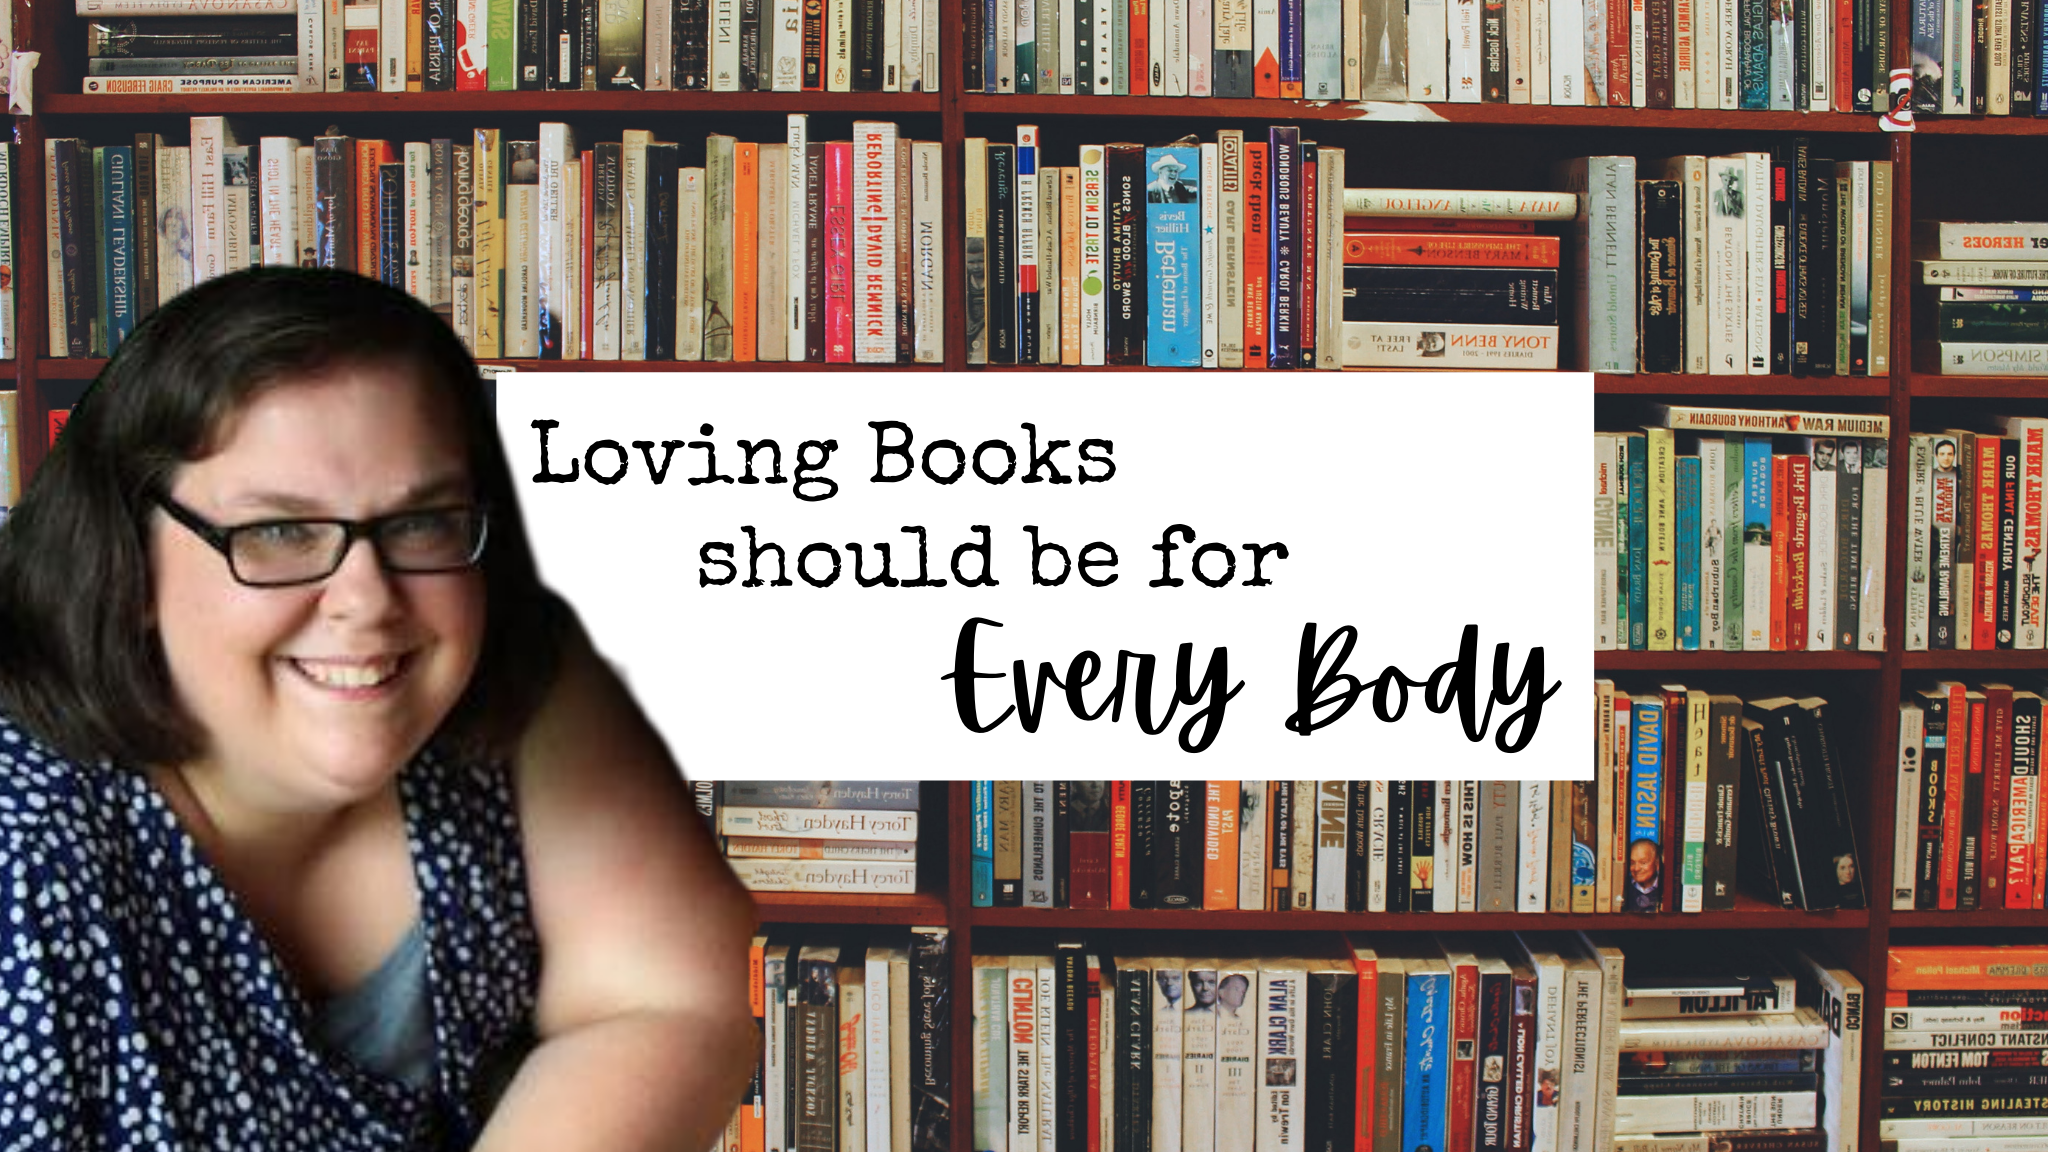 a fat brunette woman in front of bookshelves, she is wearing glasses and it says "Loving books should be for every body."